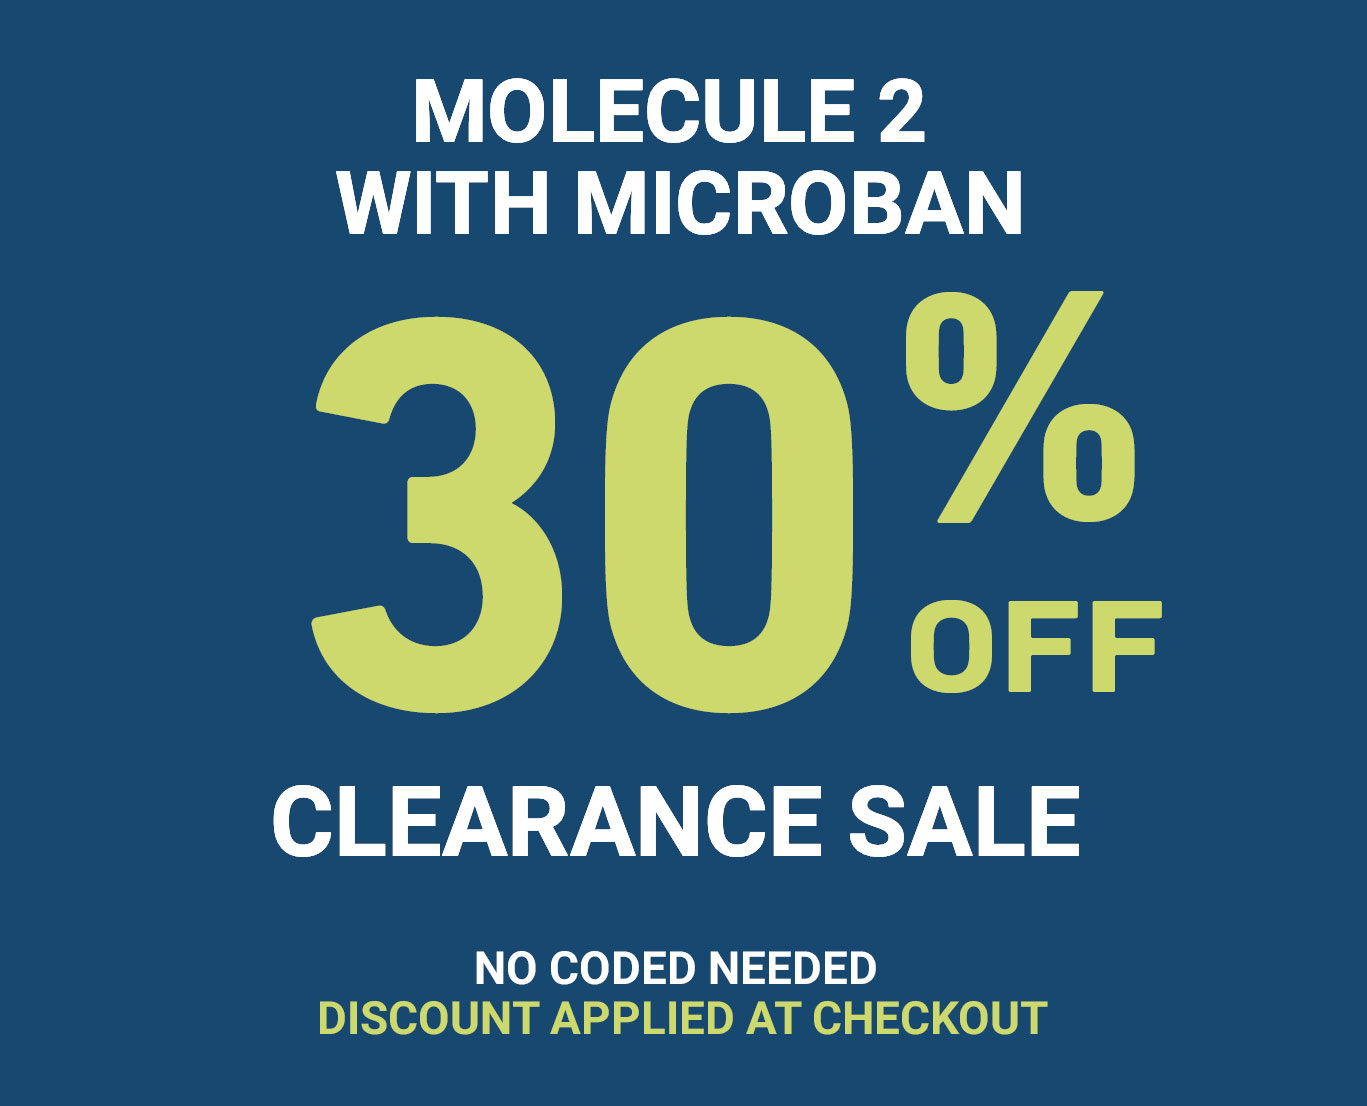 Save 30% off MOLECULE 2 with Microban (No Code Needed)